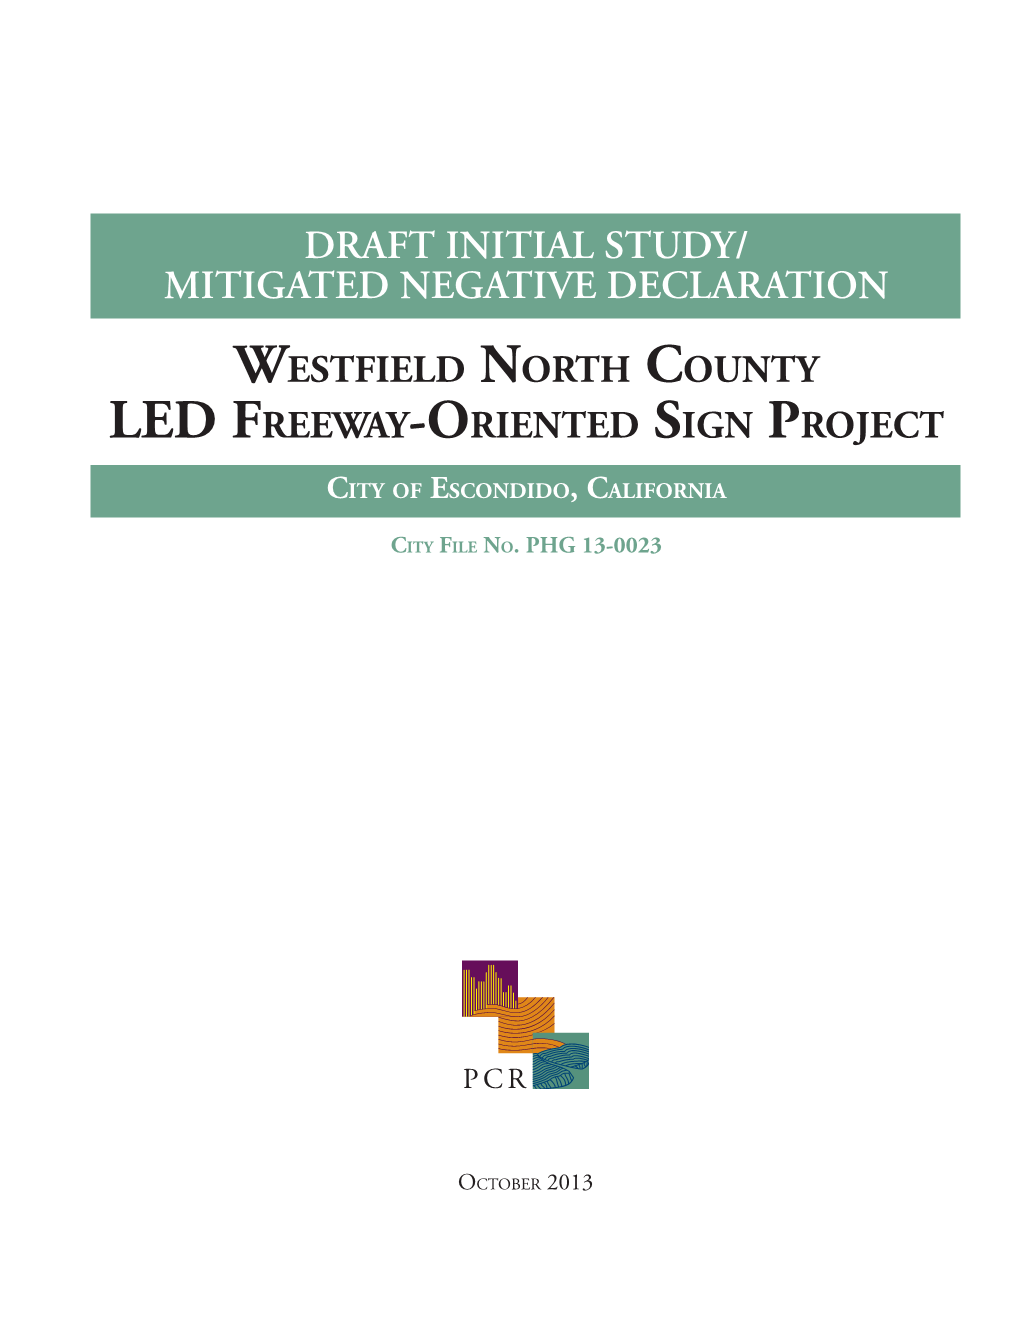 Westfield North County LED Freeway-Oriented Sign Project